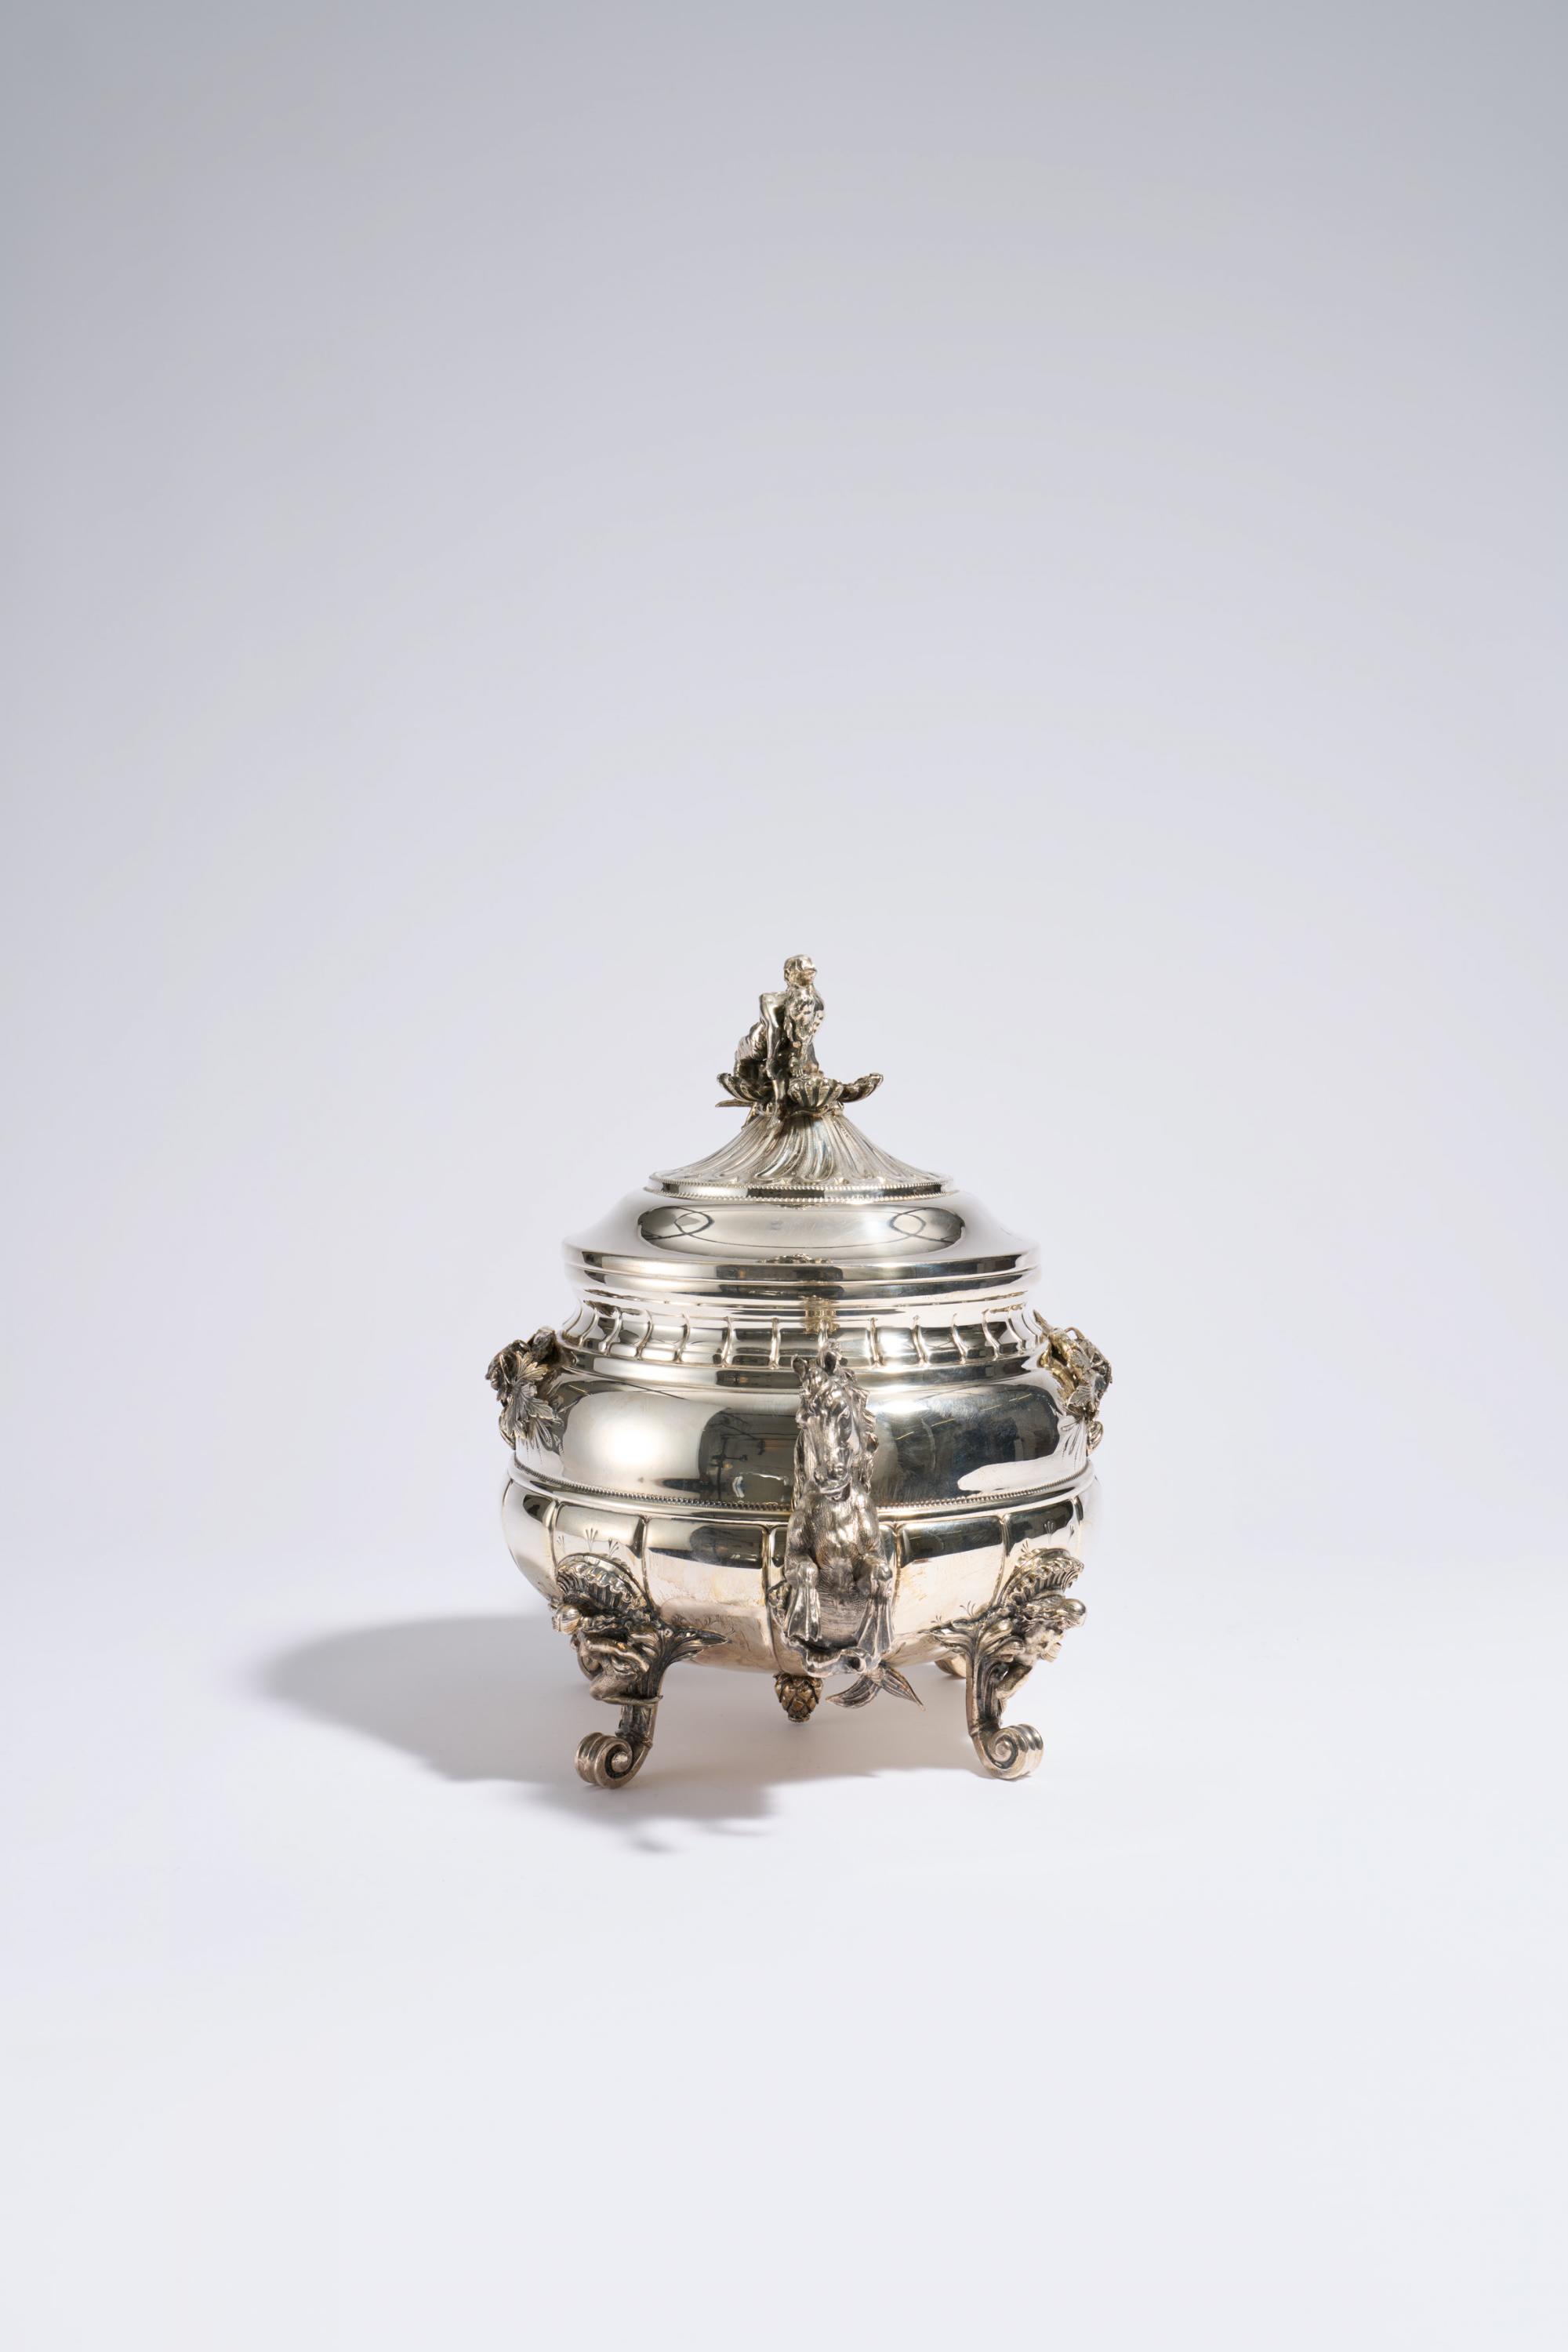 Magnificent tureen with hippocamps - Image 2 of 12